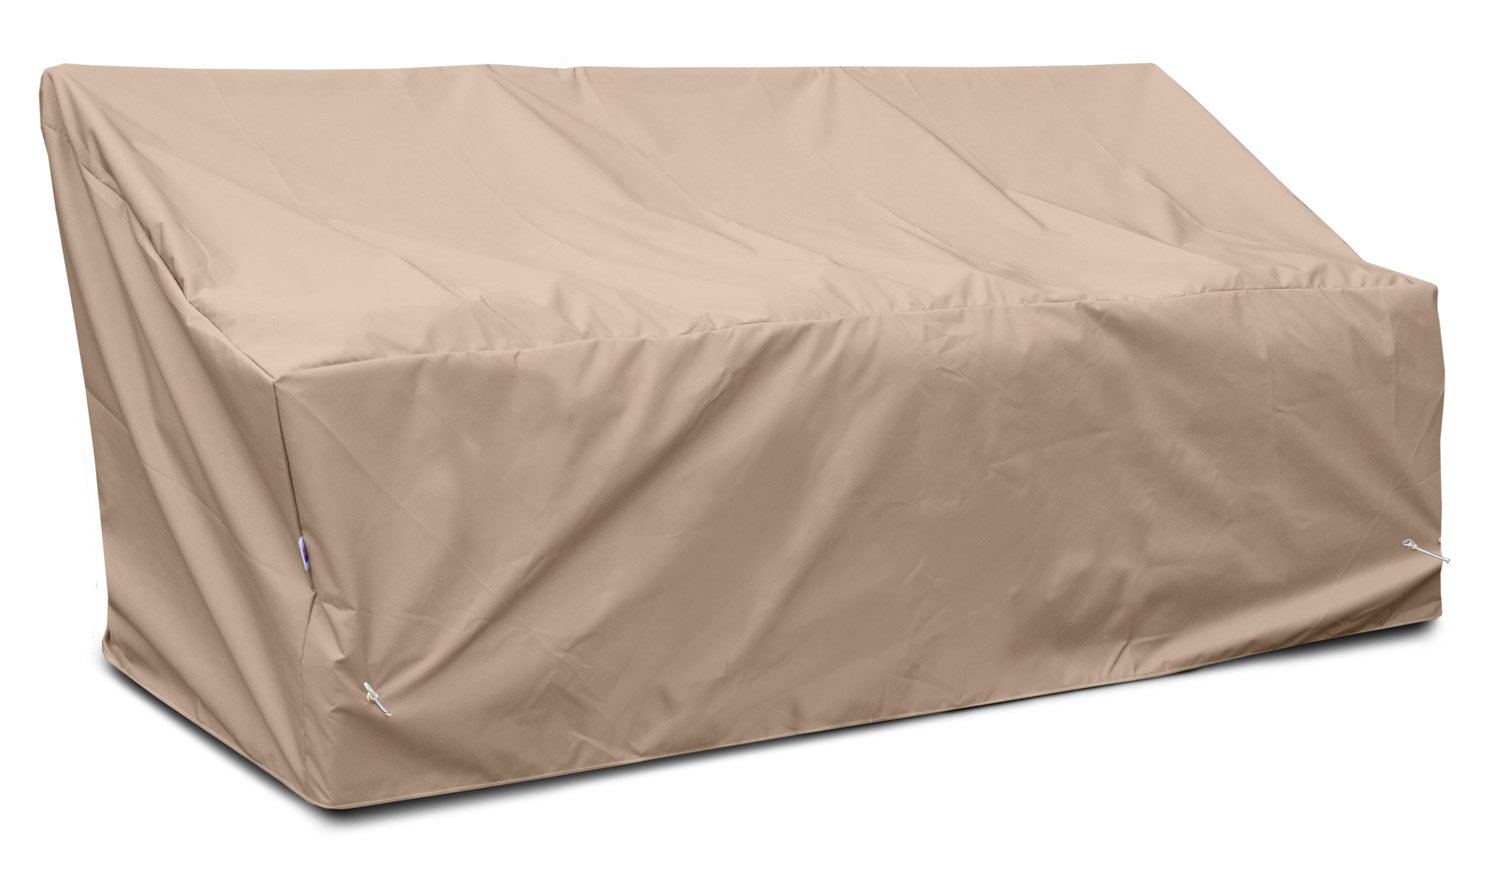 KoverRoos Weathermax 46450 Deep 3-Seat Glider/Lounge Cover, 89-Inch Width by 36-Inch Diameter by 33-Inch Height, Toast